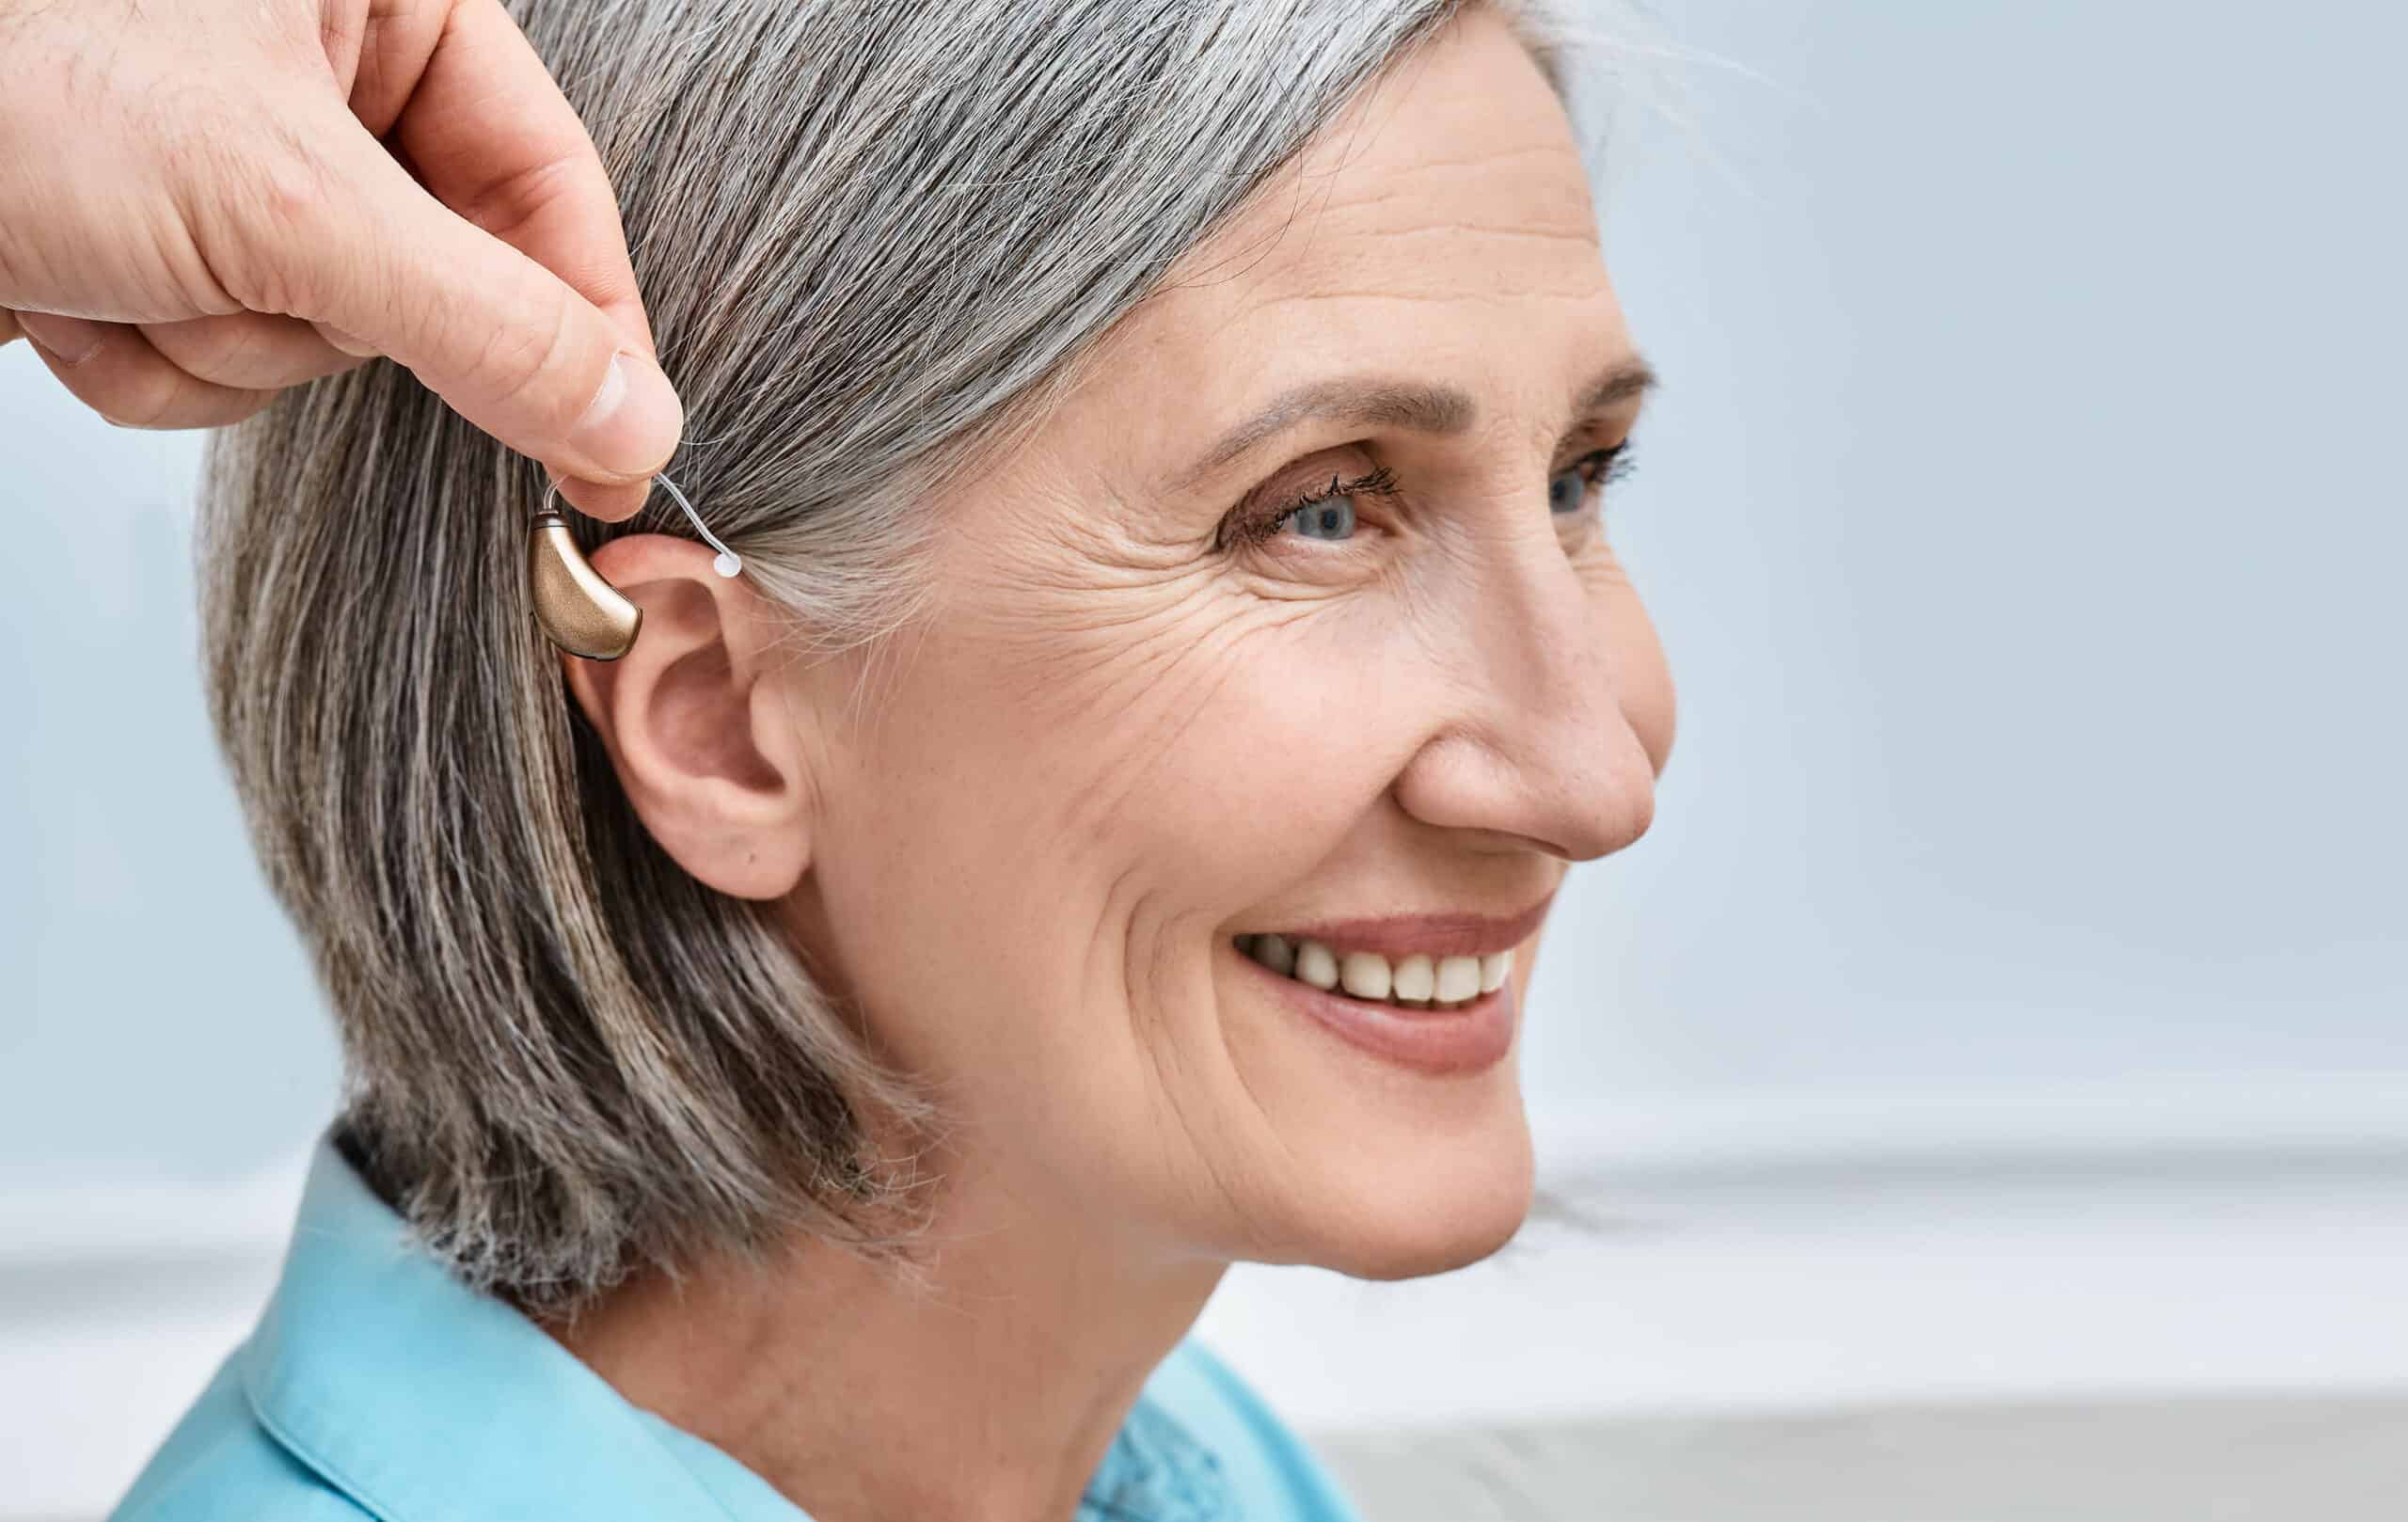 Featured image for “What Is It Like to Wear Hearing Aids”